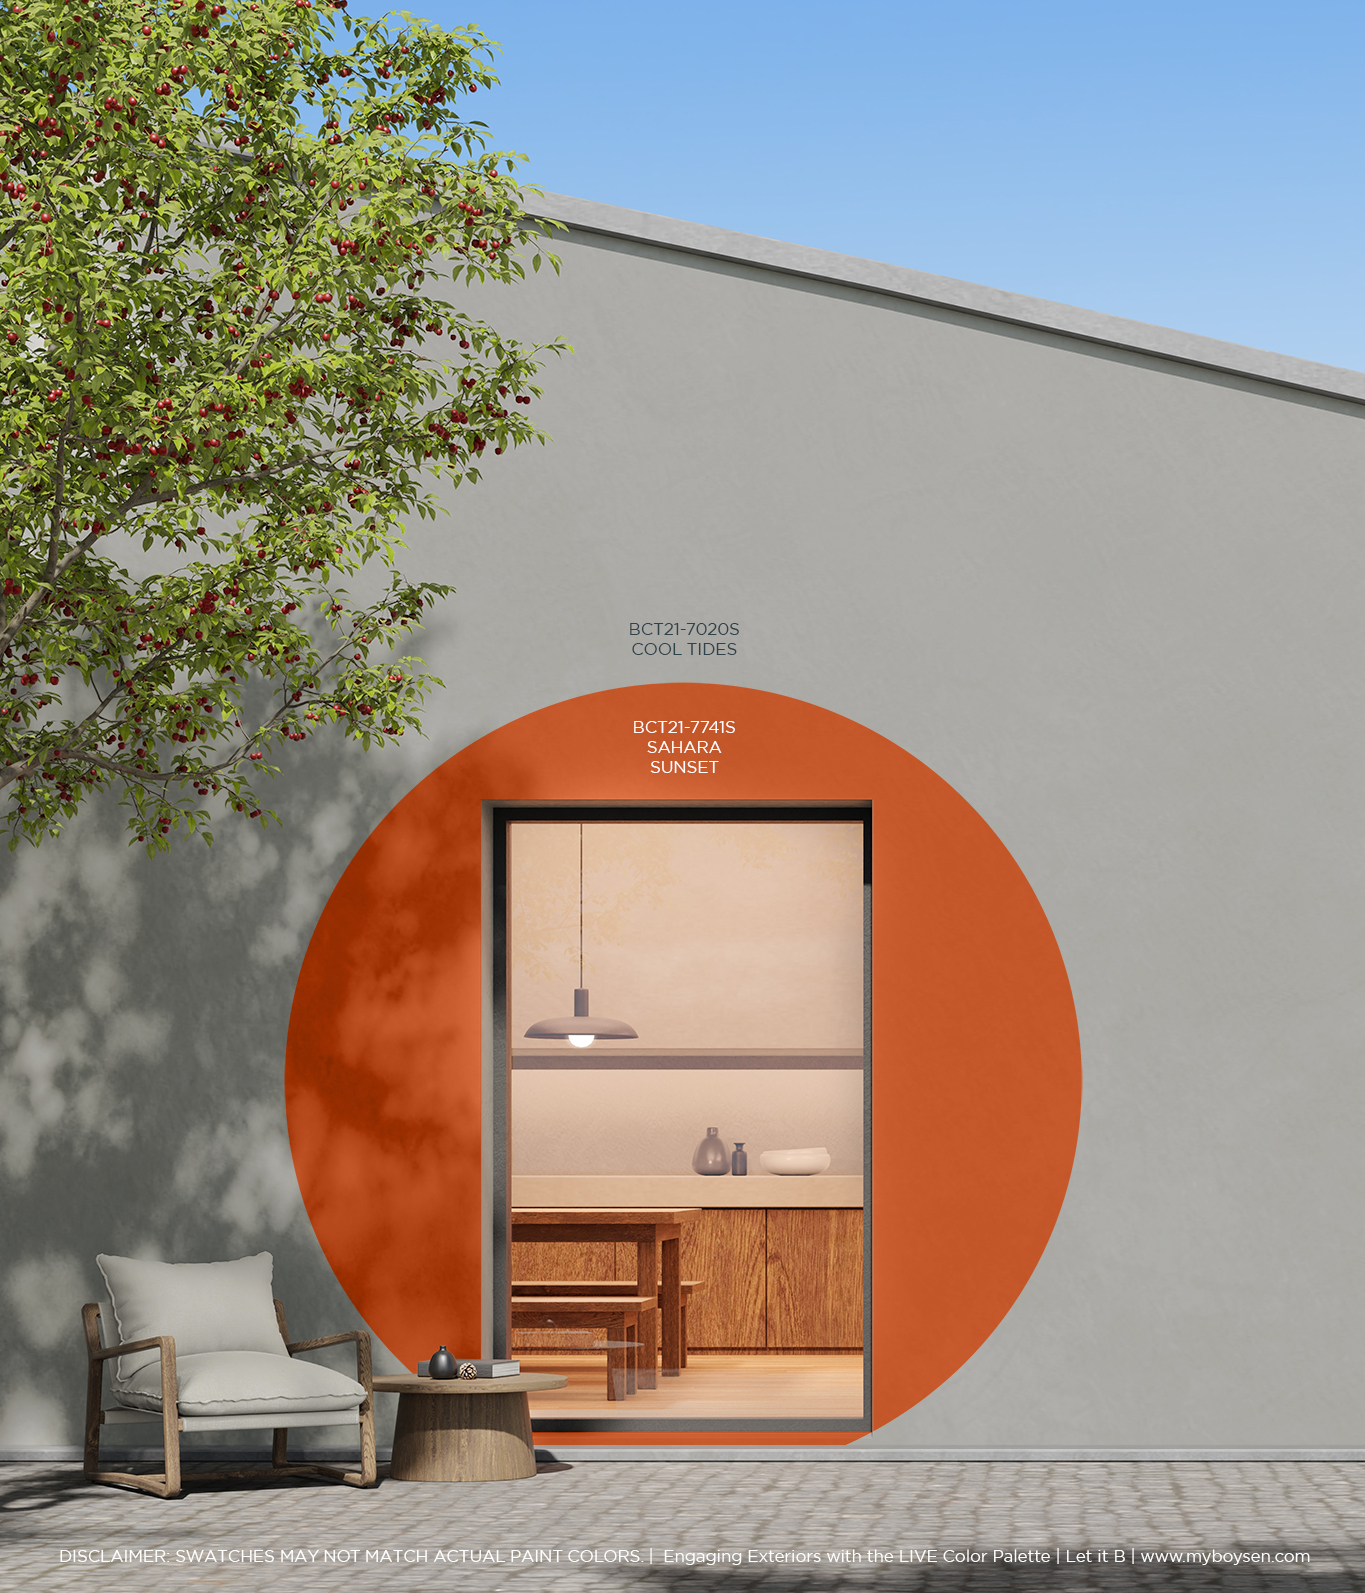 Engaging Exteriors with the LIVE Color Palette | MyBoysen